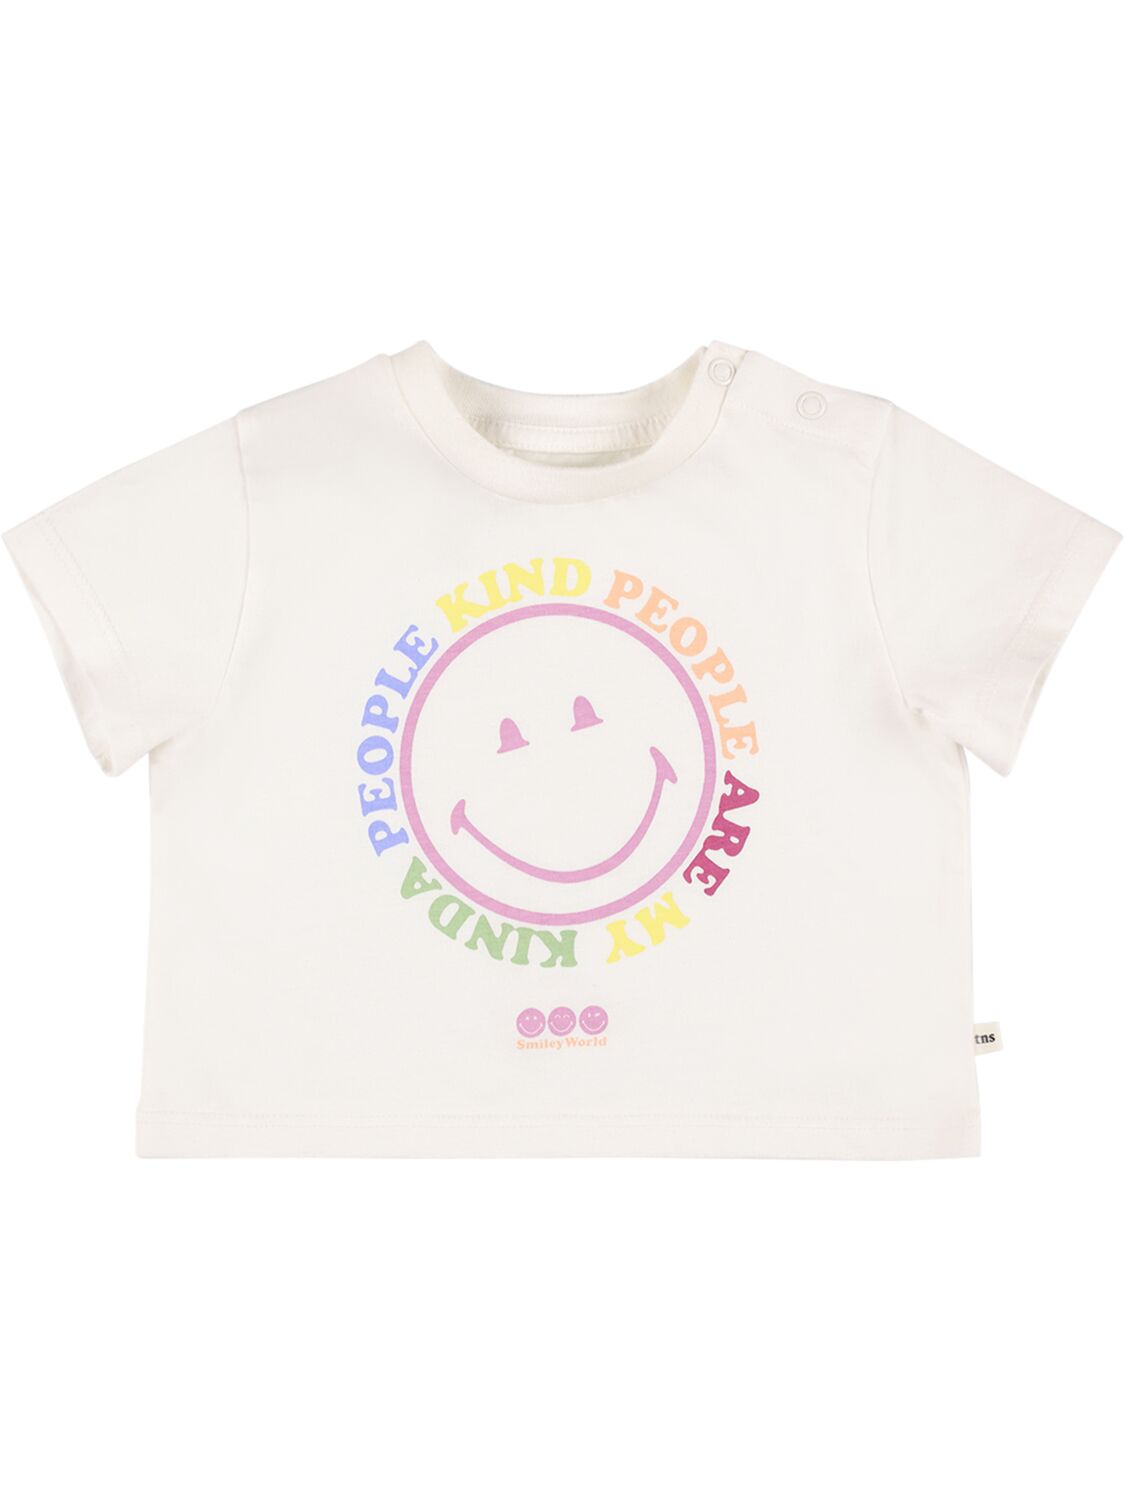 The New Society Kids' Bci Cotton Jersey T-shirt In White